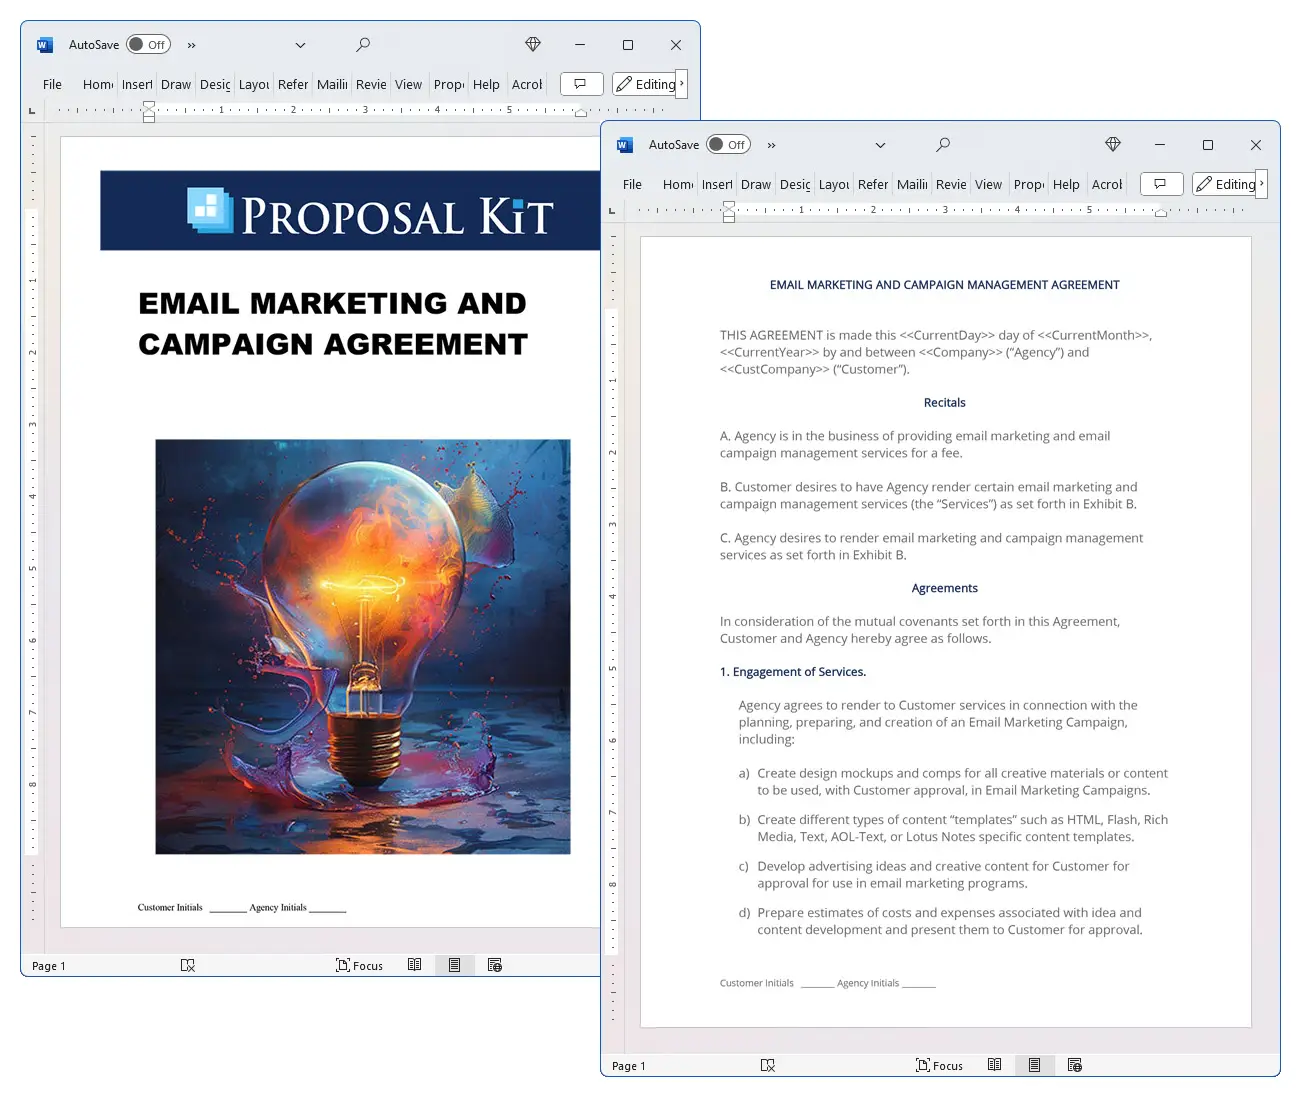 Email Marketing and Campaign Agreement Concepts